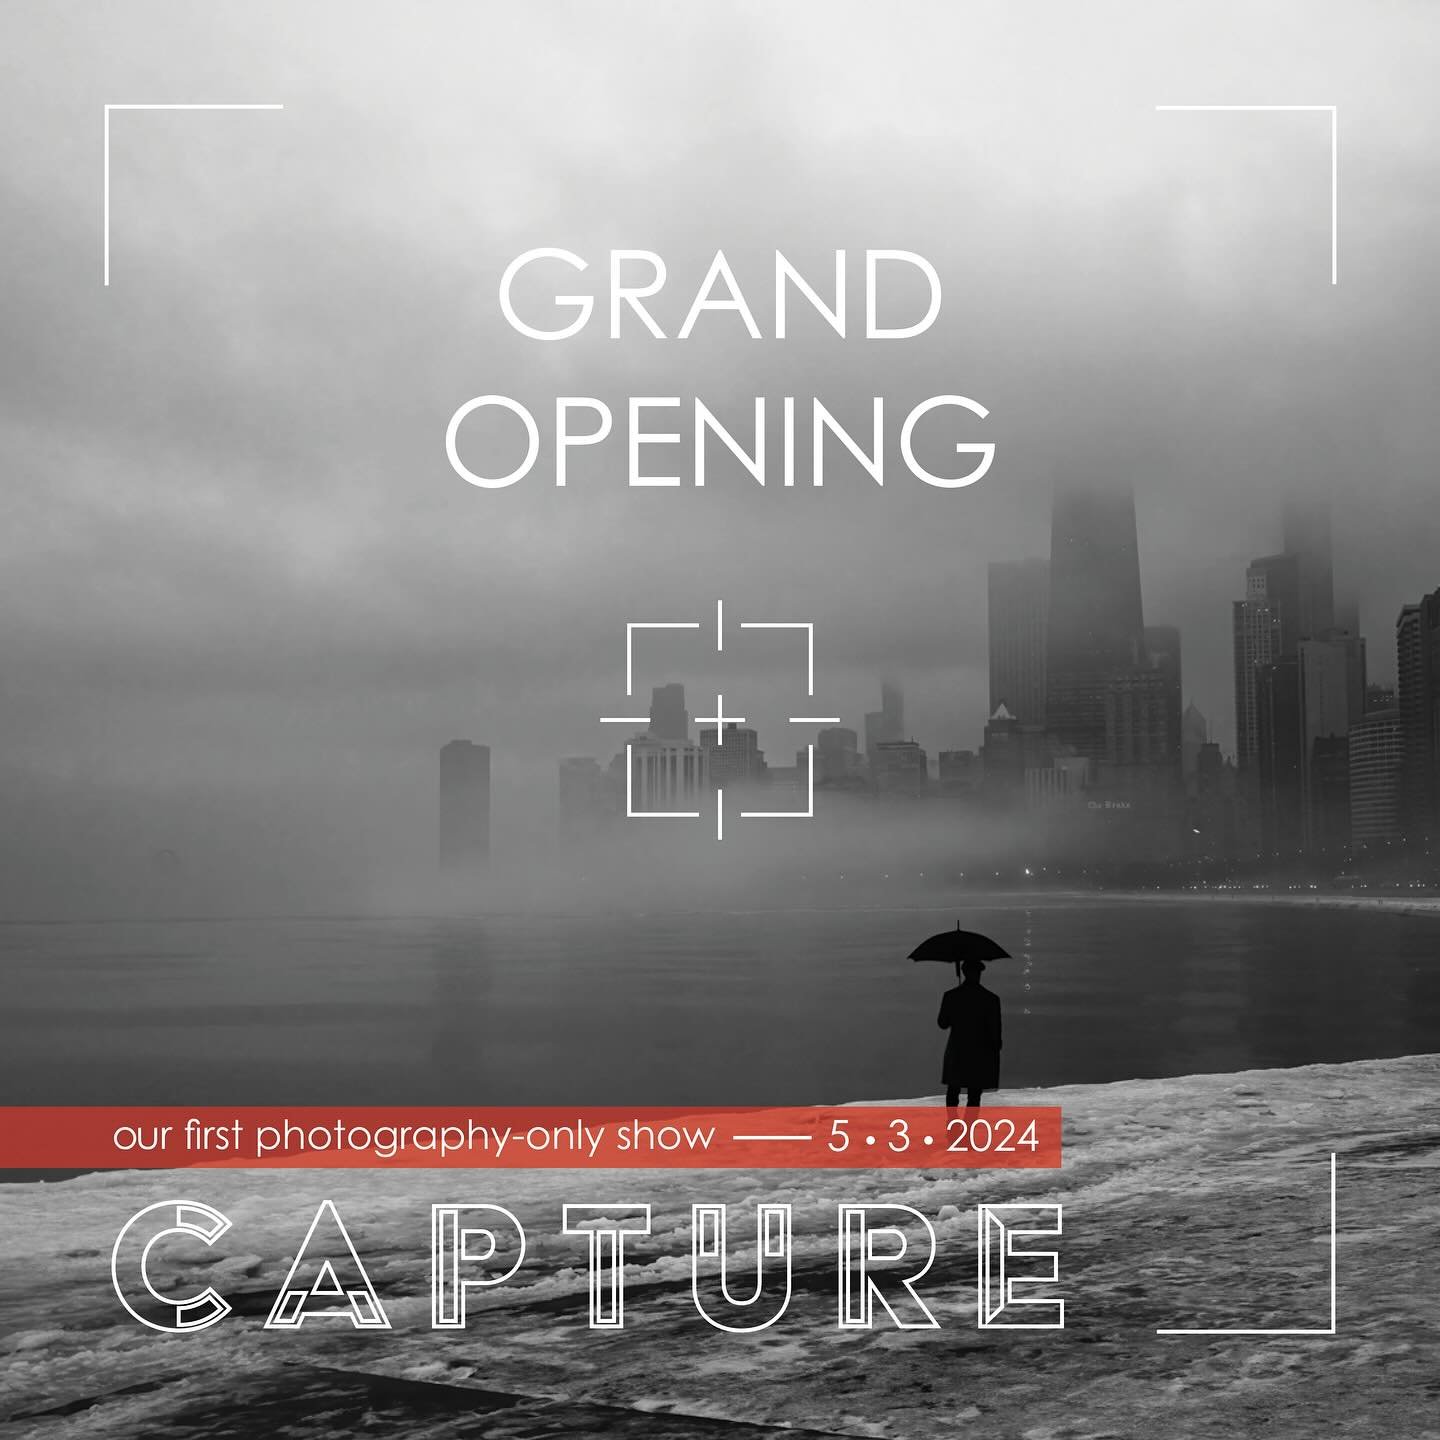 Join us for the opening reception of CAPTURE! 📸

Come from 5 to 8 PM on May 3rd to see some incredible photography by Chicago artists! We&rsquo;ll be hosting the reception at CFAS, located at 2623 W Chicago Ave. Chicago, IL. 

RSVP through the event